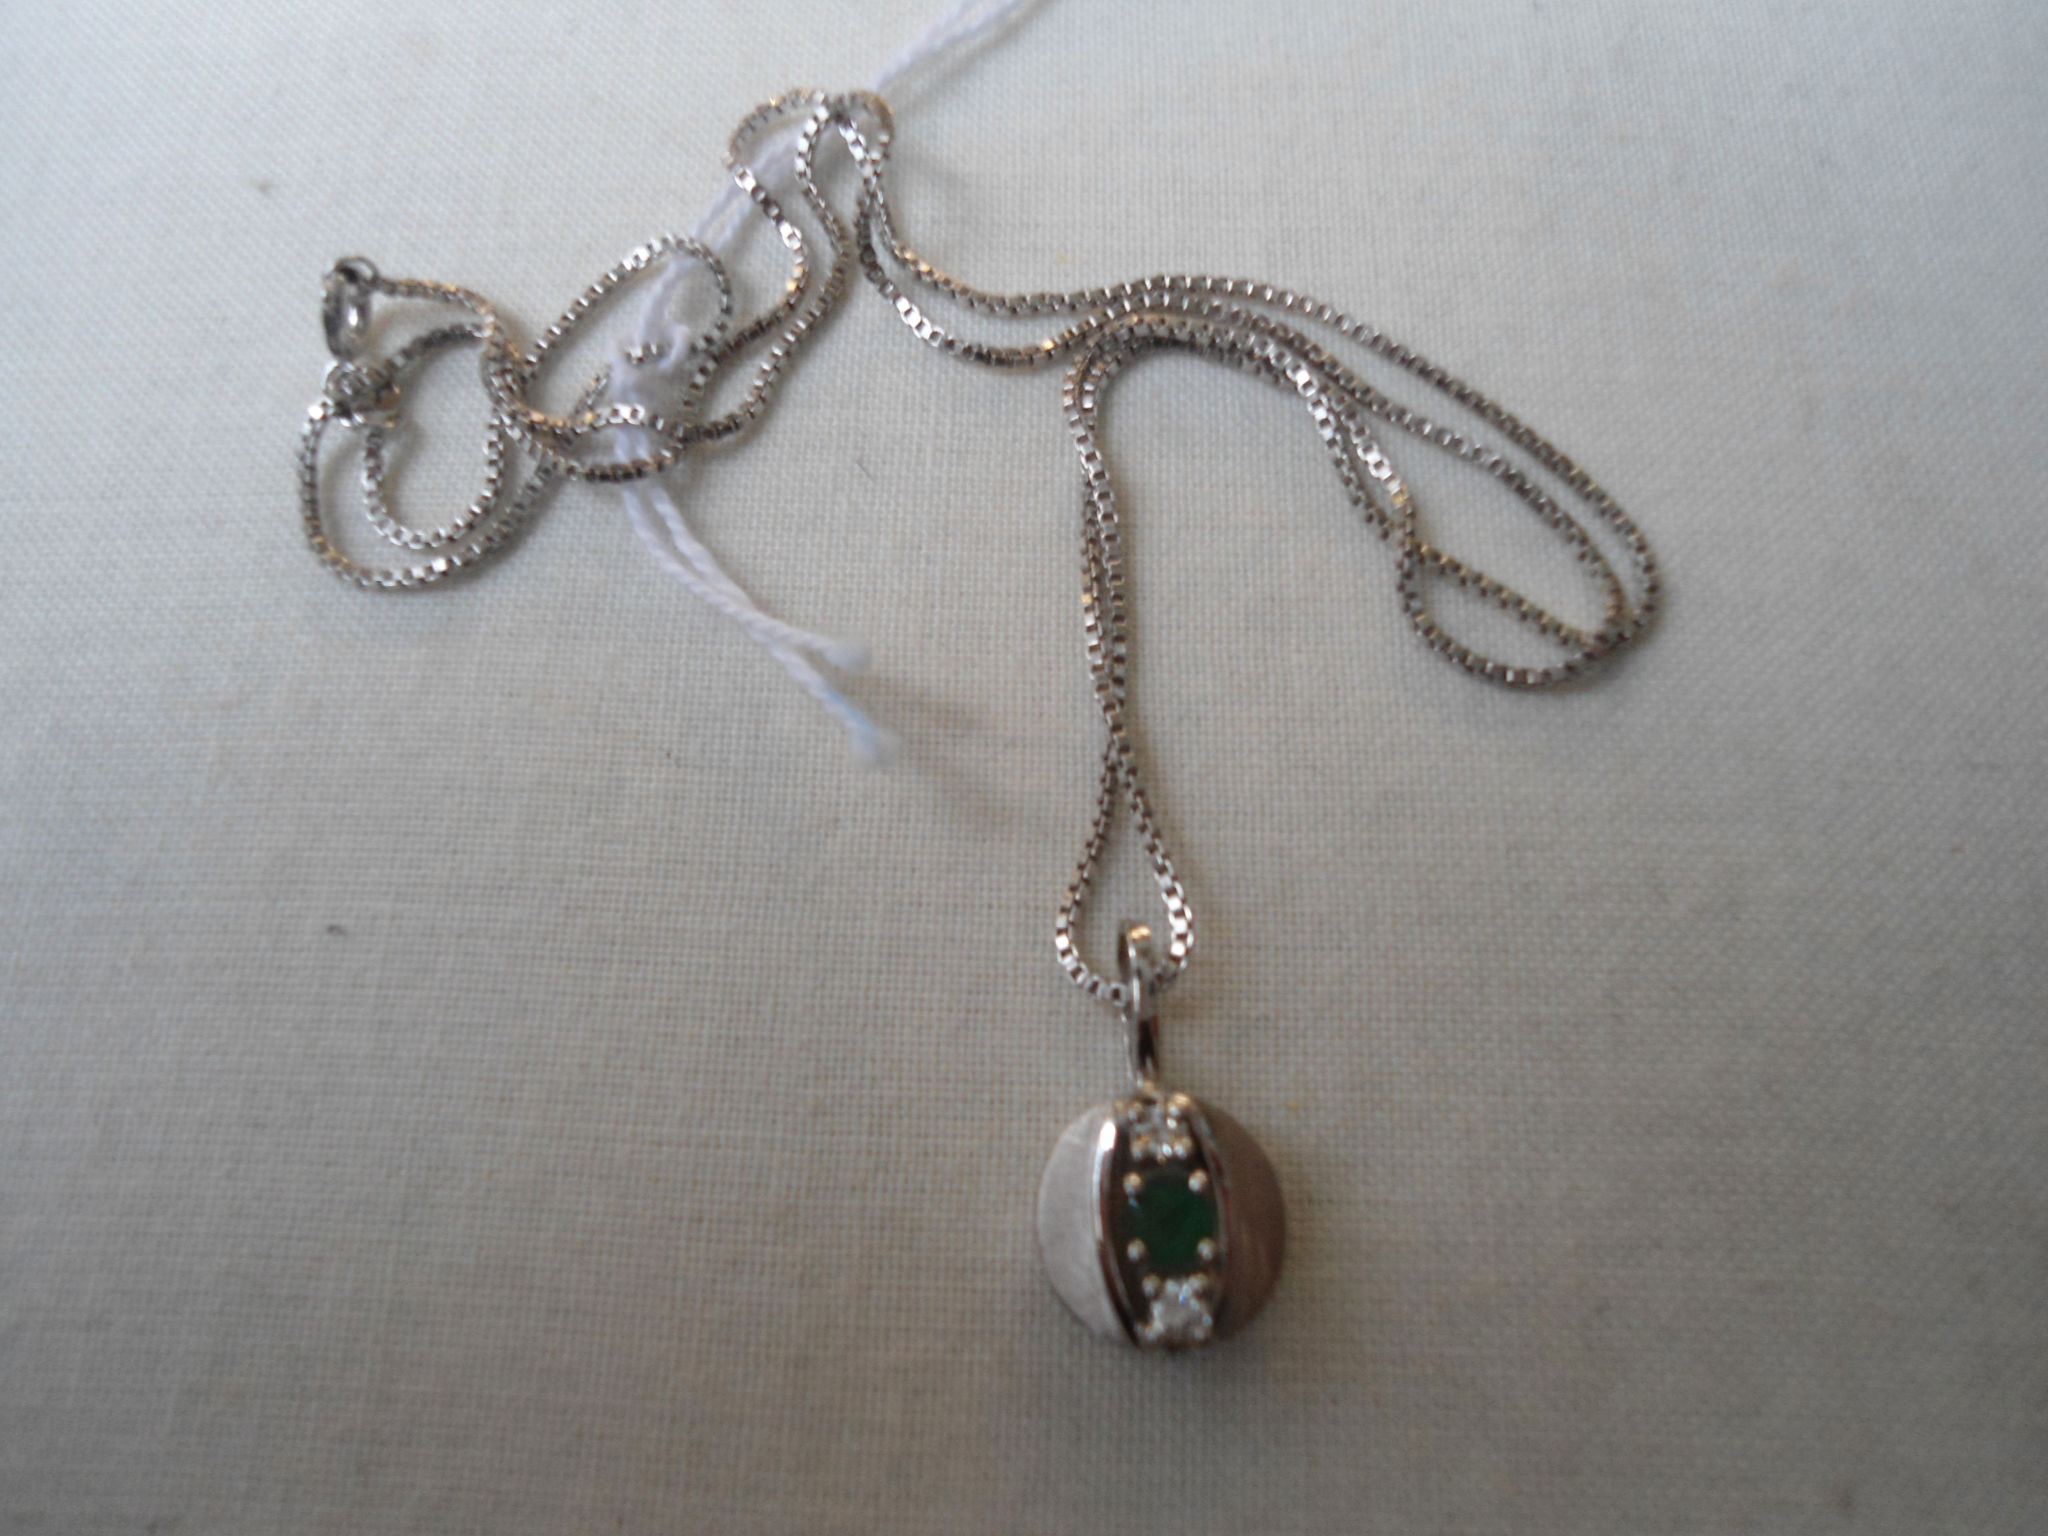 A German white gold pendant on chain set with an emerald and 2 diamonds, together with a German